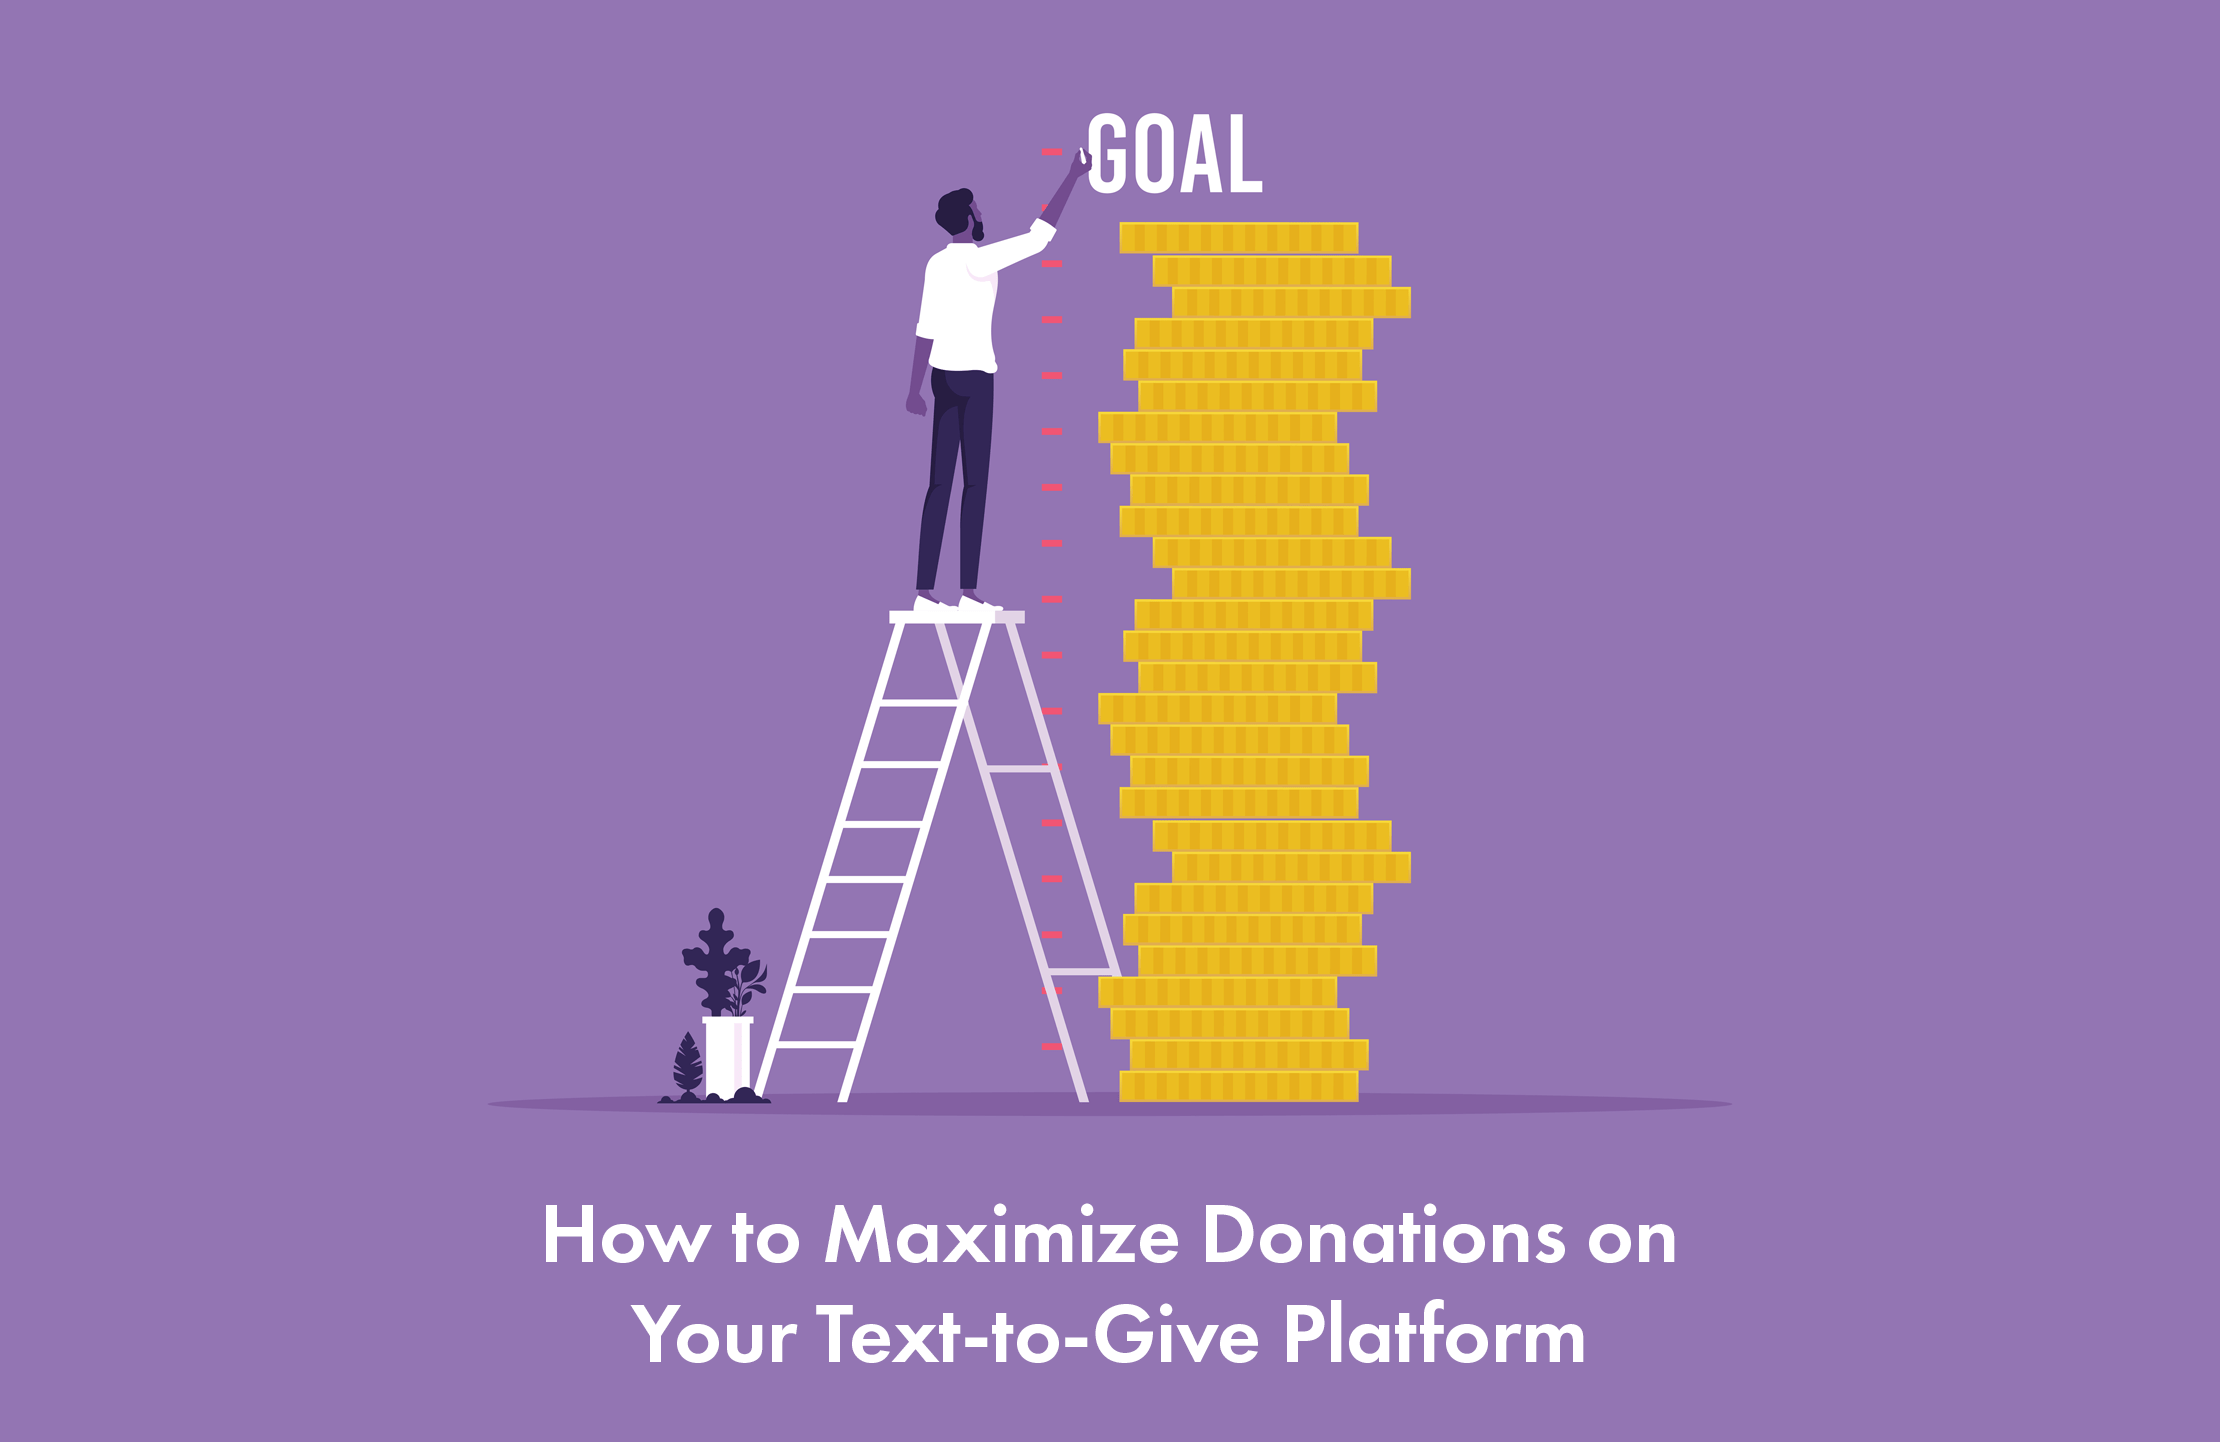 How To Maximize Donations on Your Text-To-Give Platform